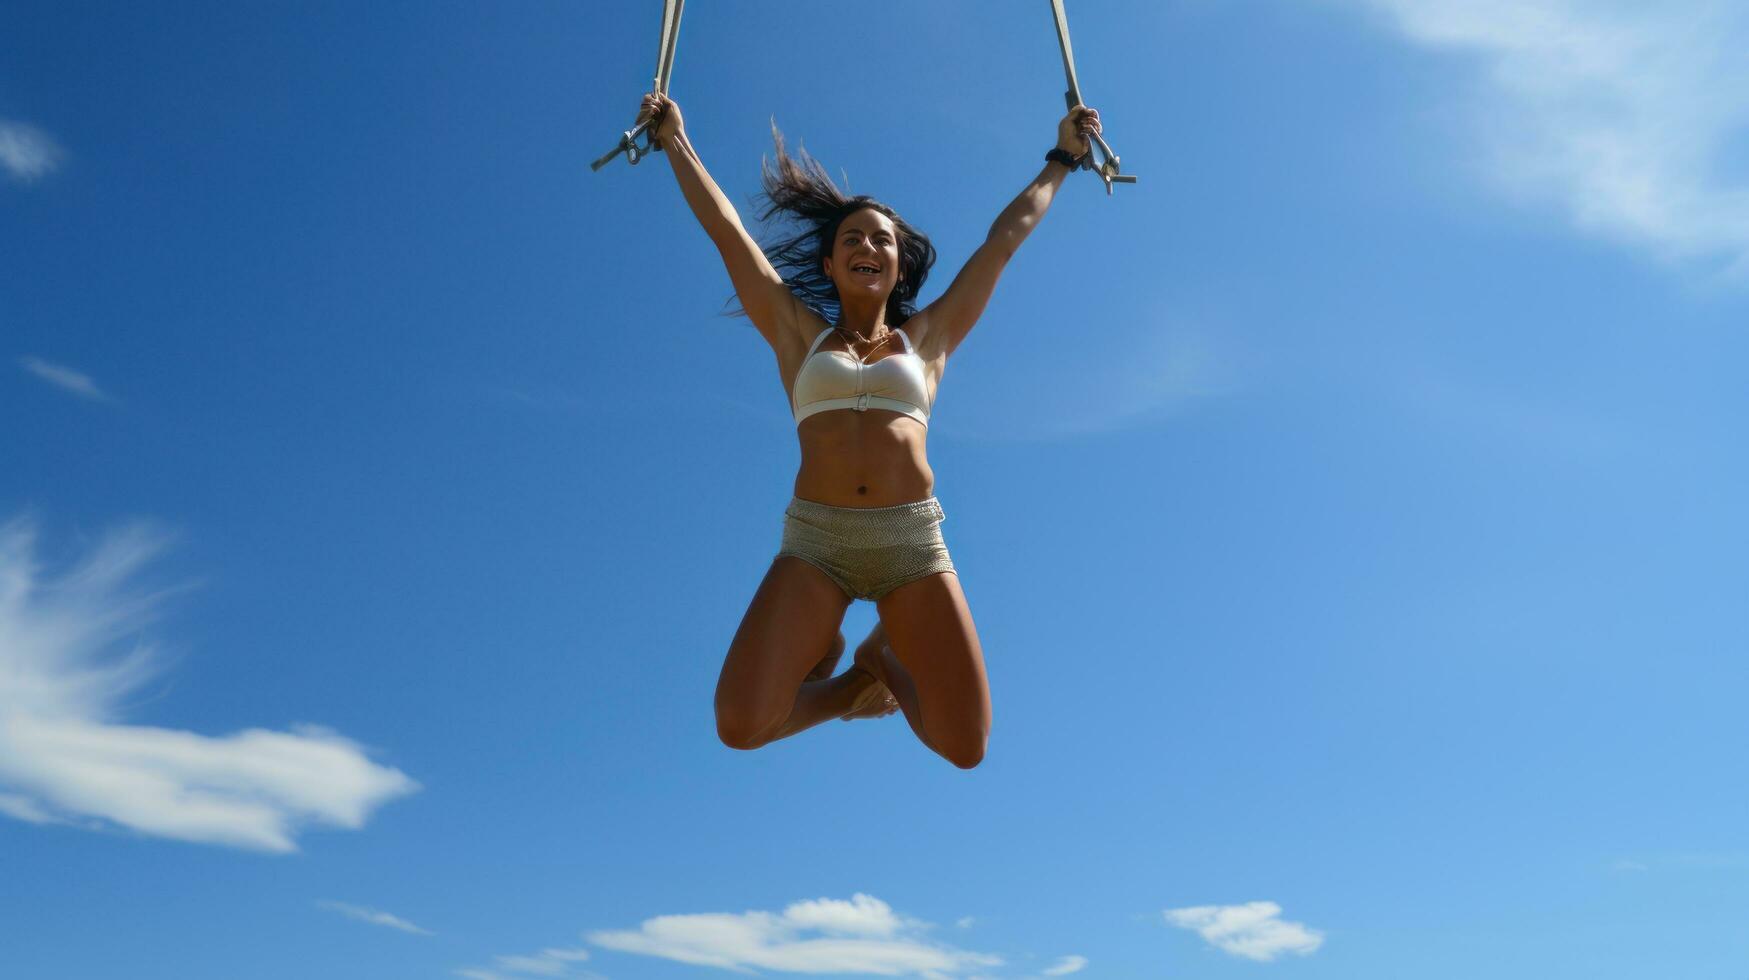 Trapeze. Swinging and flipping high above the ground photo